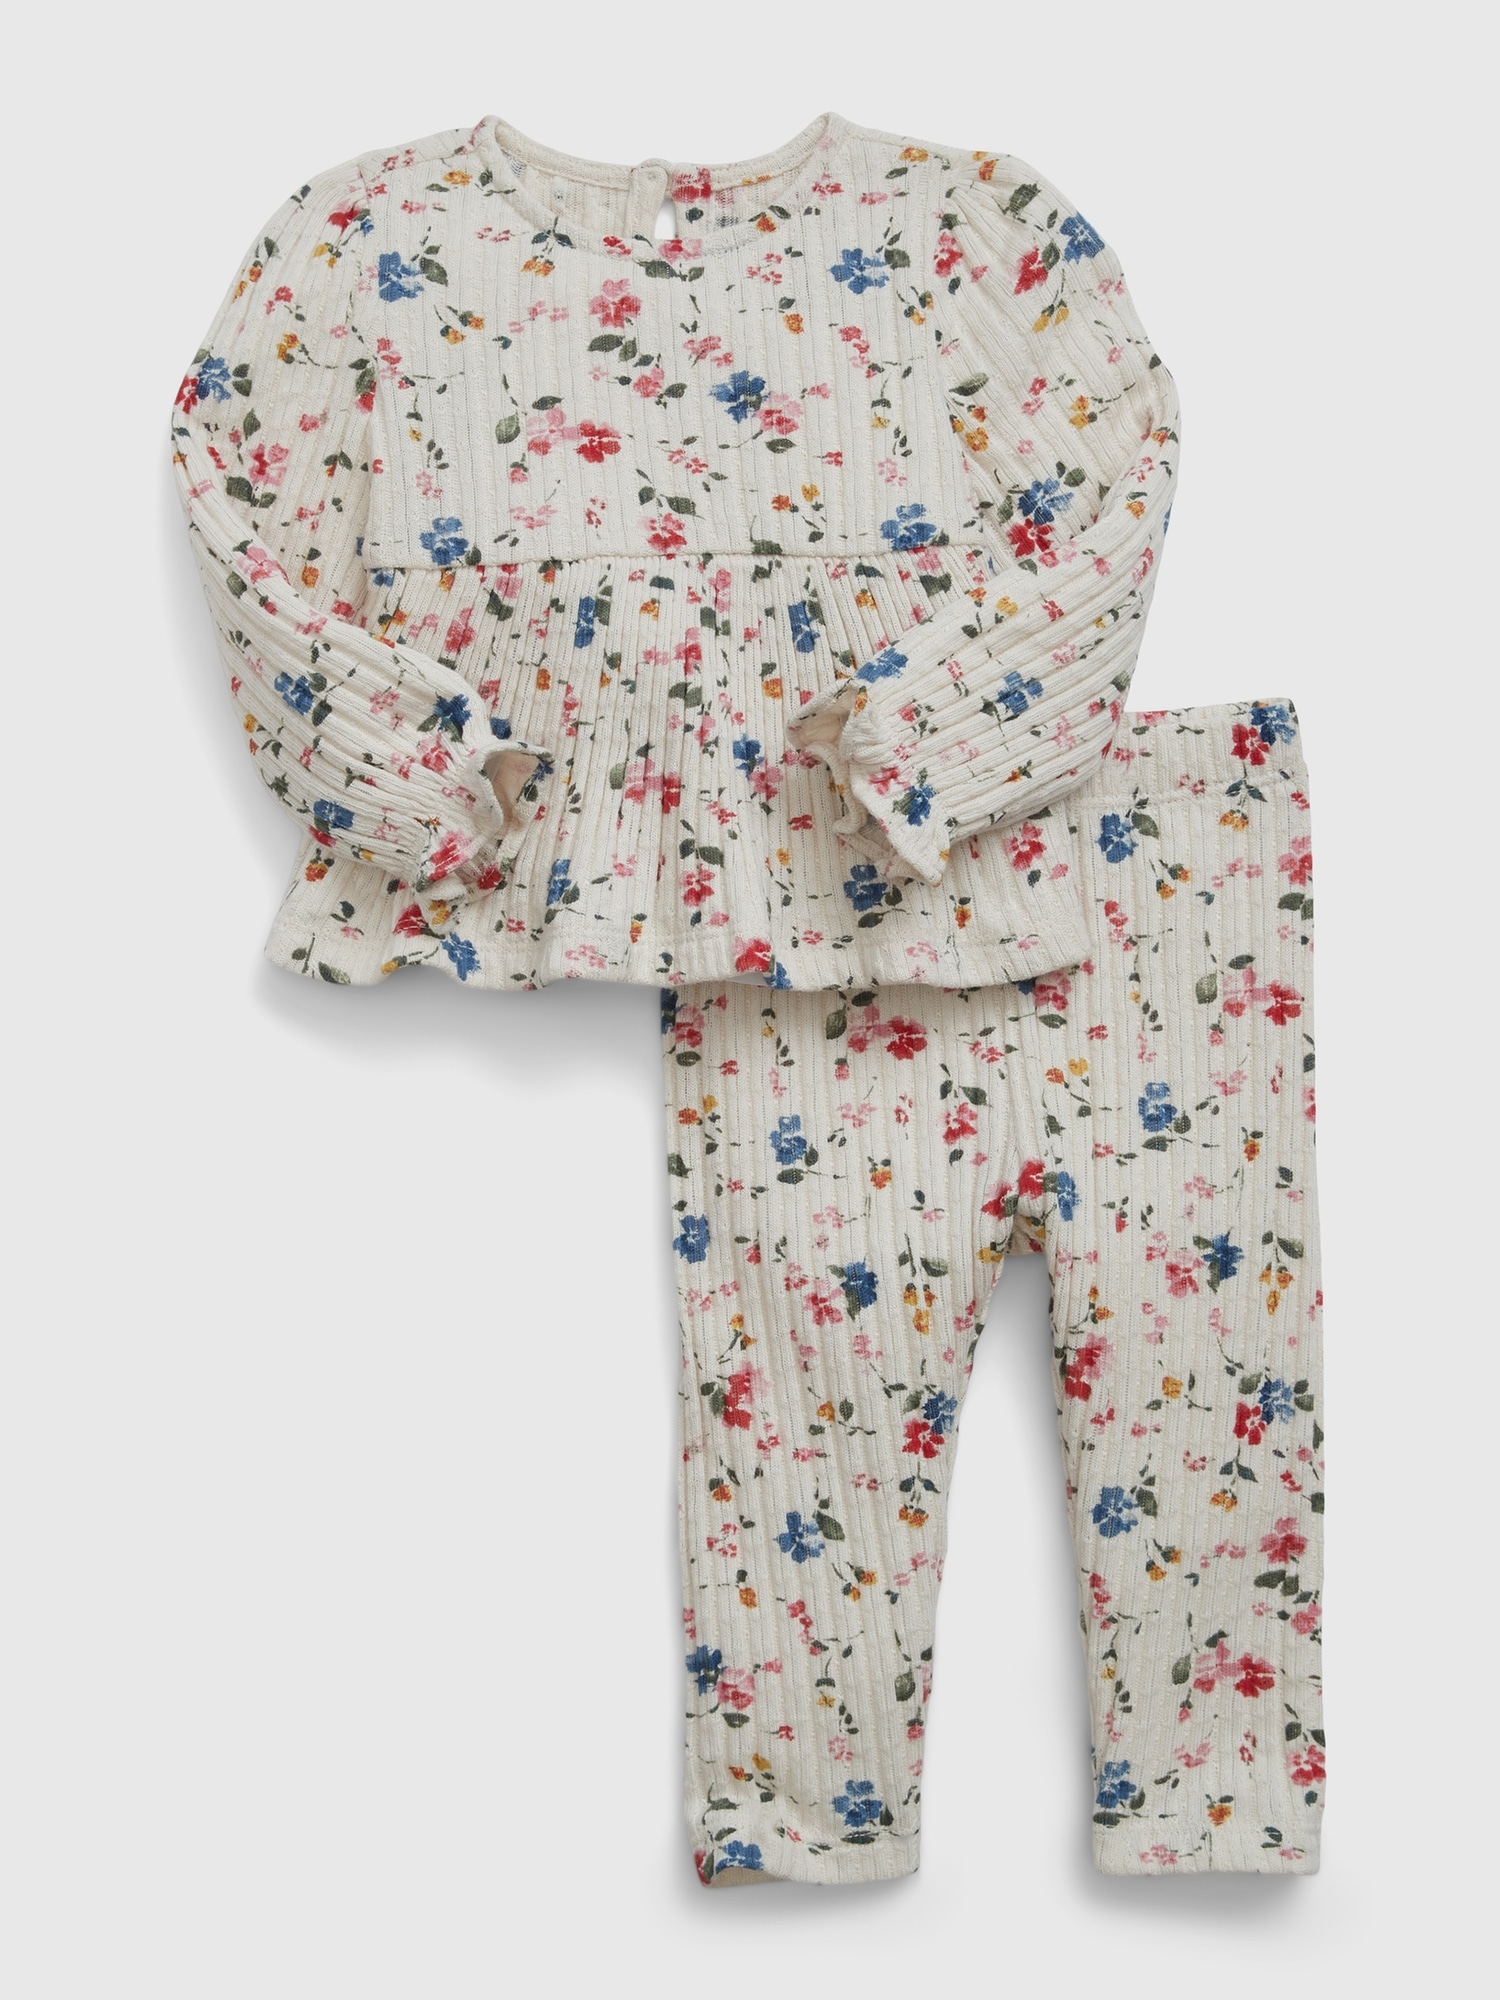 Baby Pointelle Rib Outfit Set | Gap